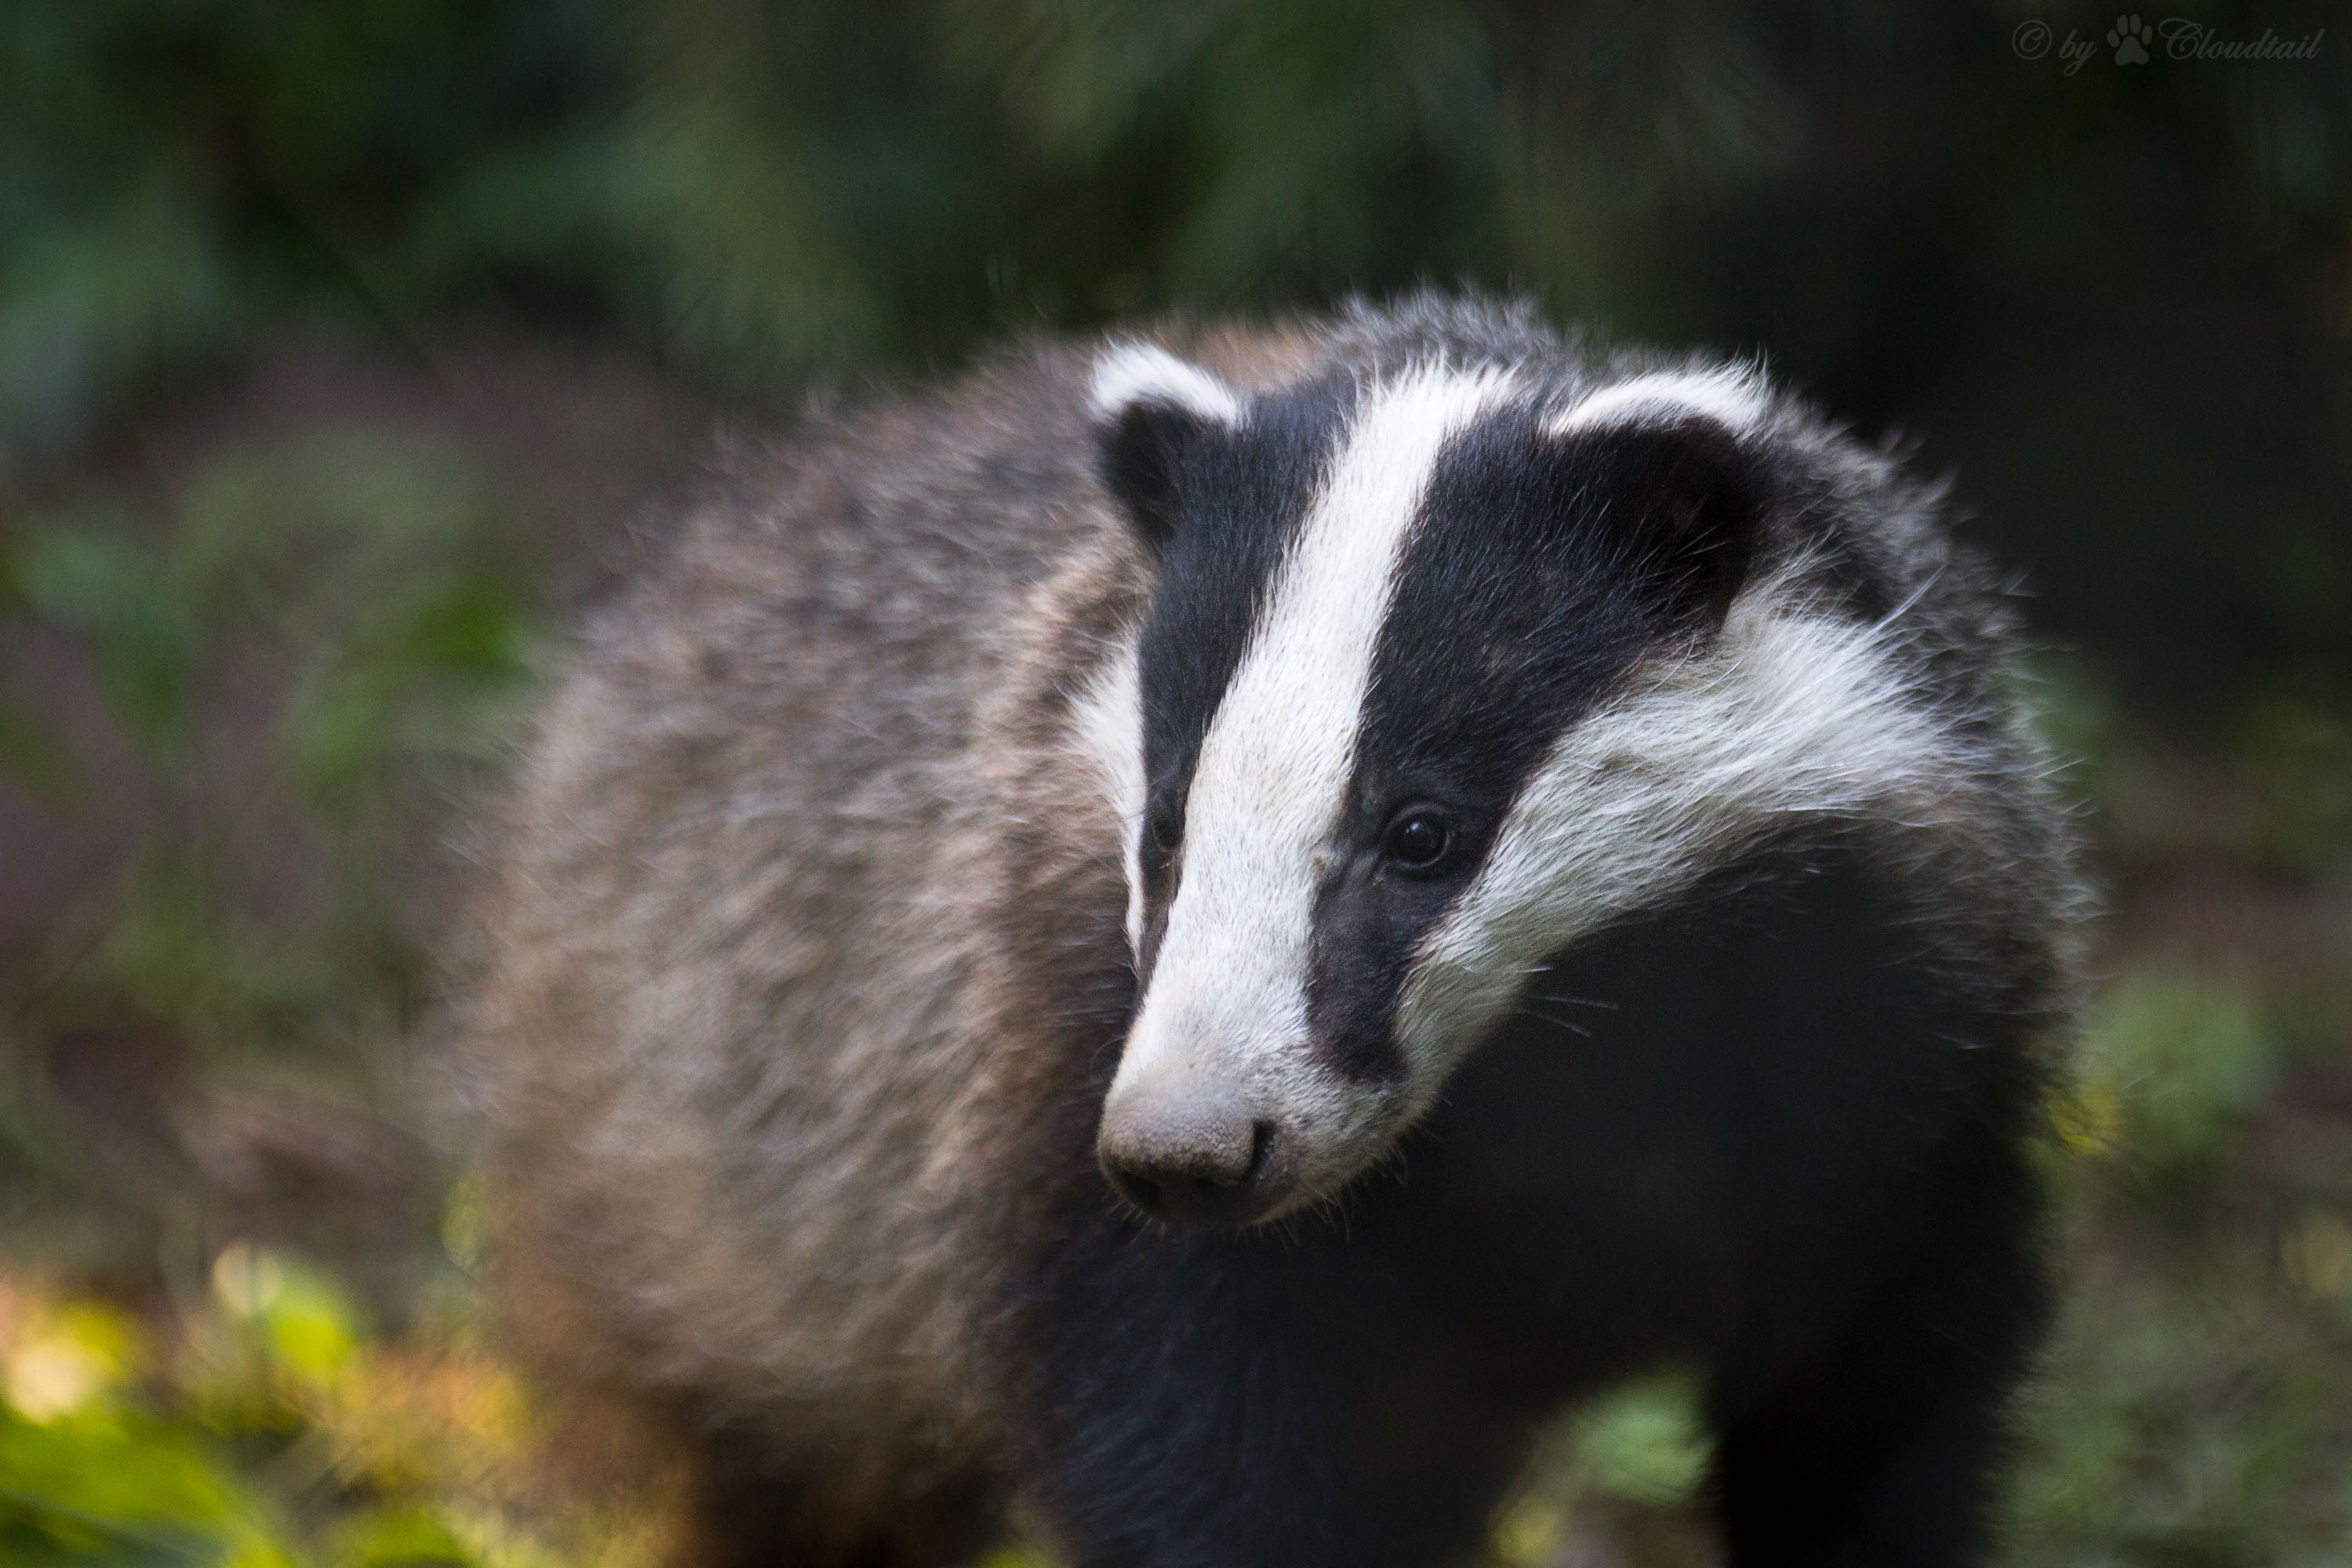 Badger cull update - Animal Aid